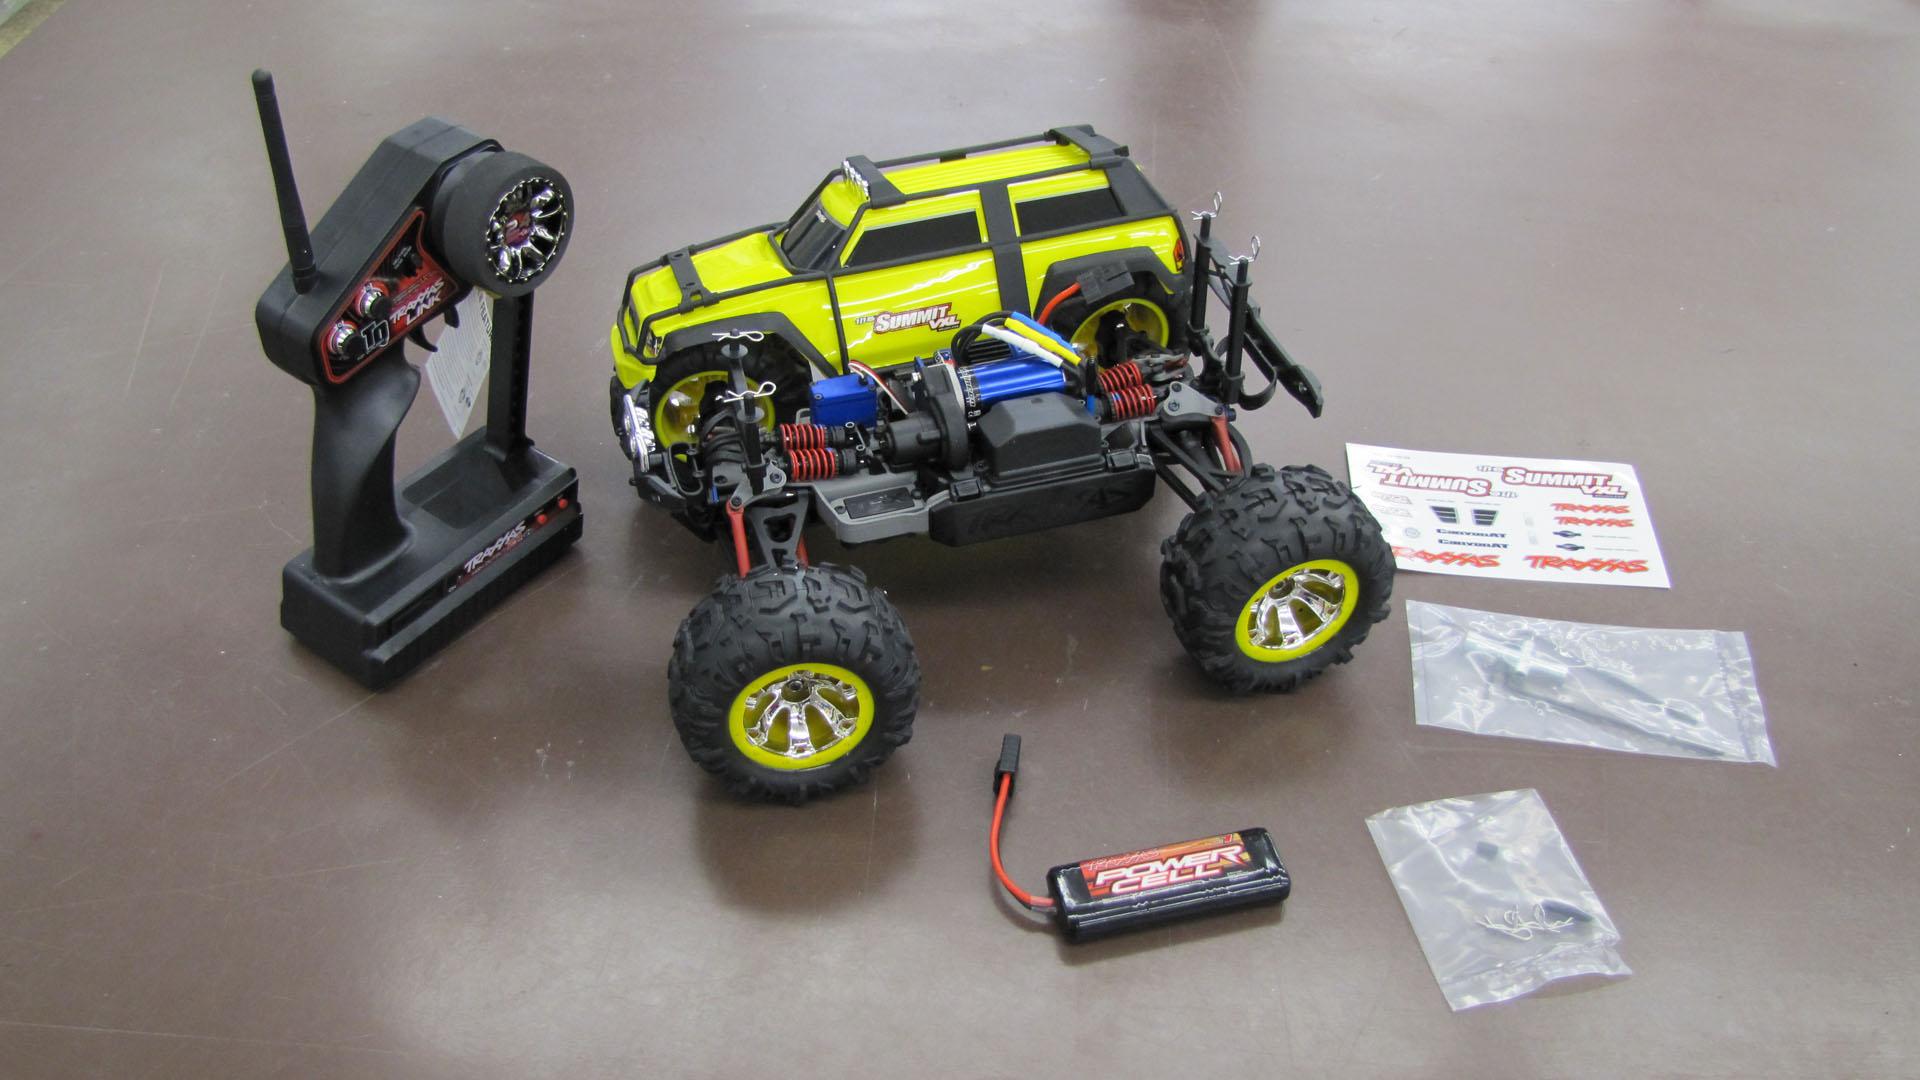 Summit Rc Car: Considerations for Owning a Summit RC Car